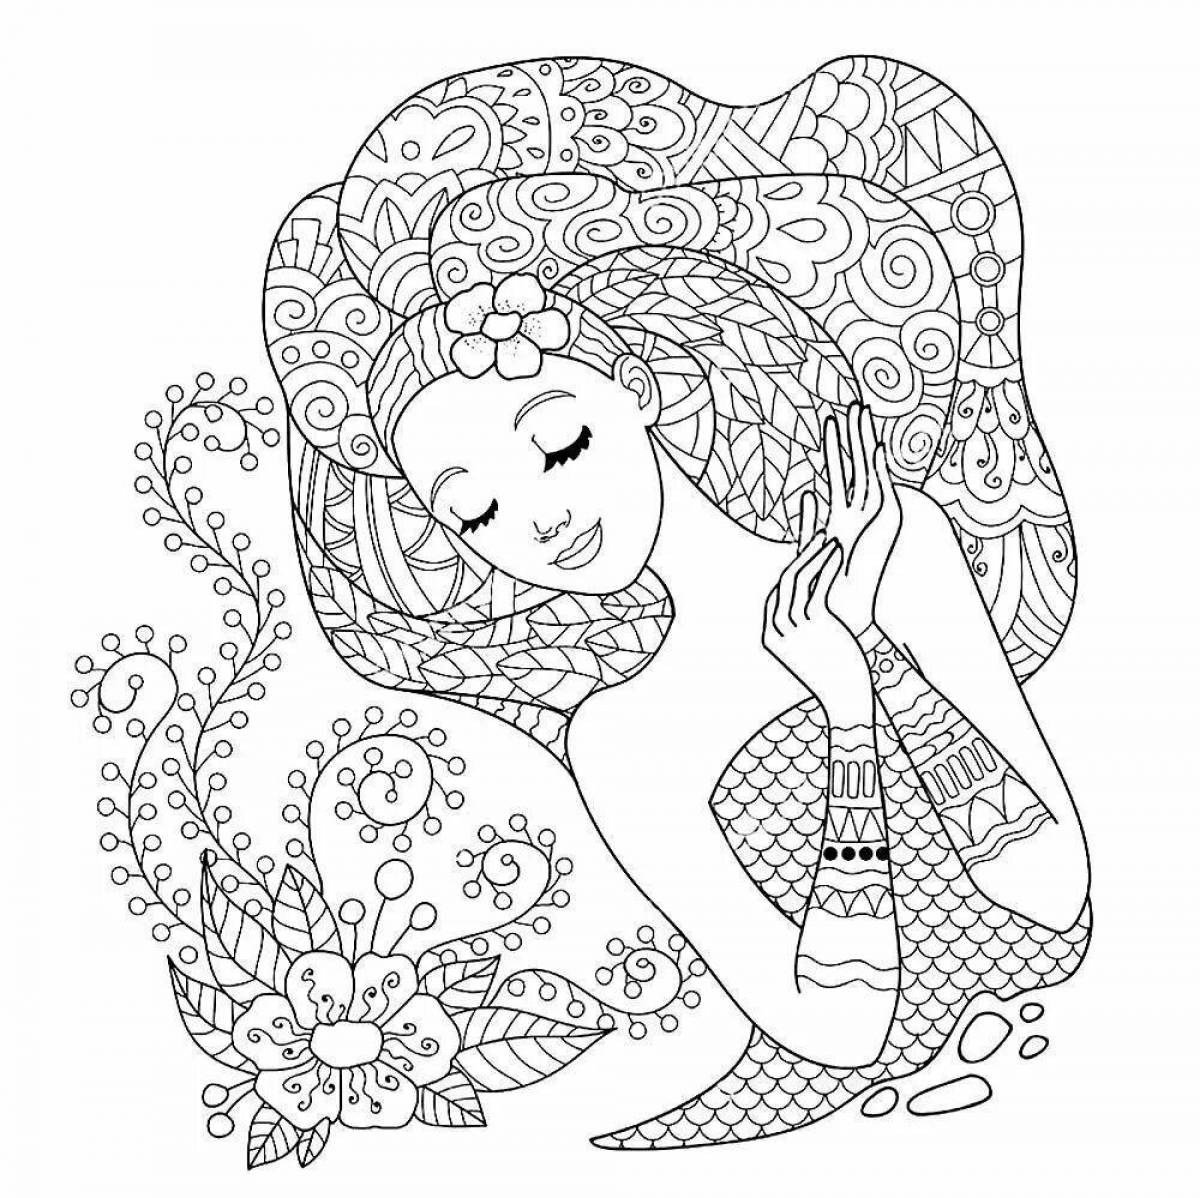 Colored psychological coloring book for children